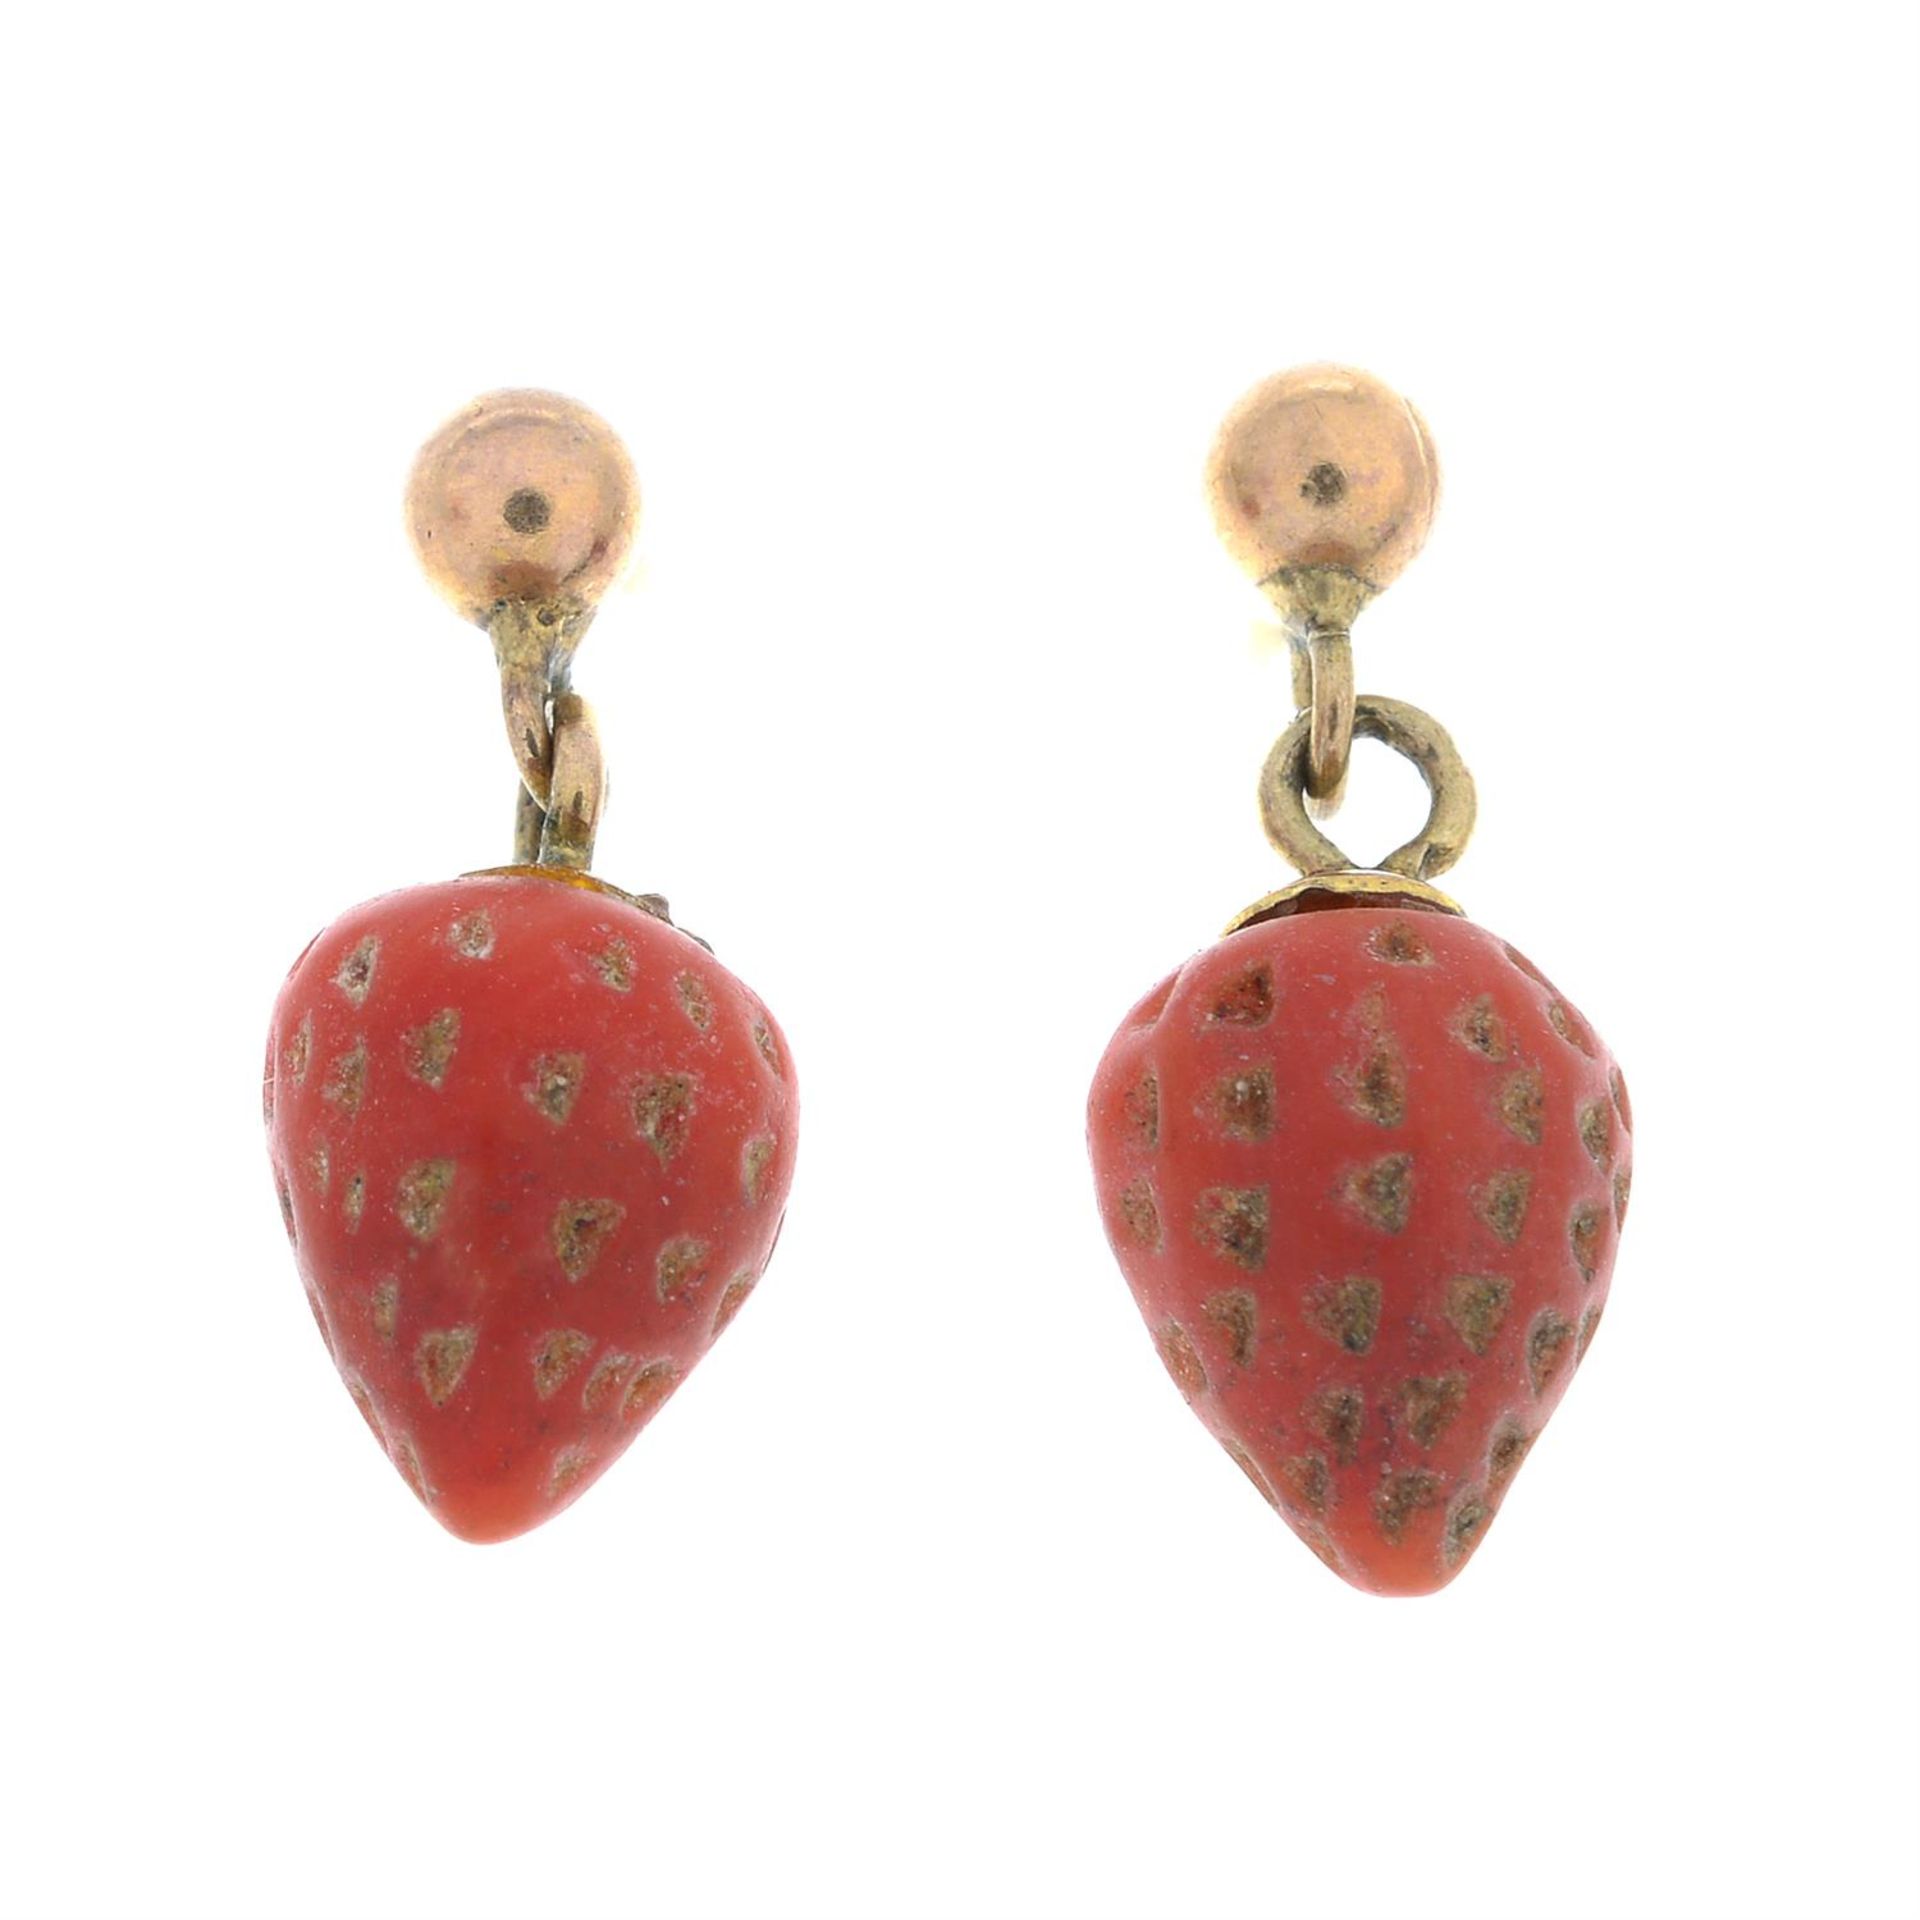 A pair of coral drop earrings, each carved to depict a strawberry.